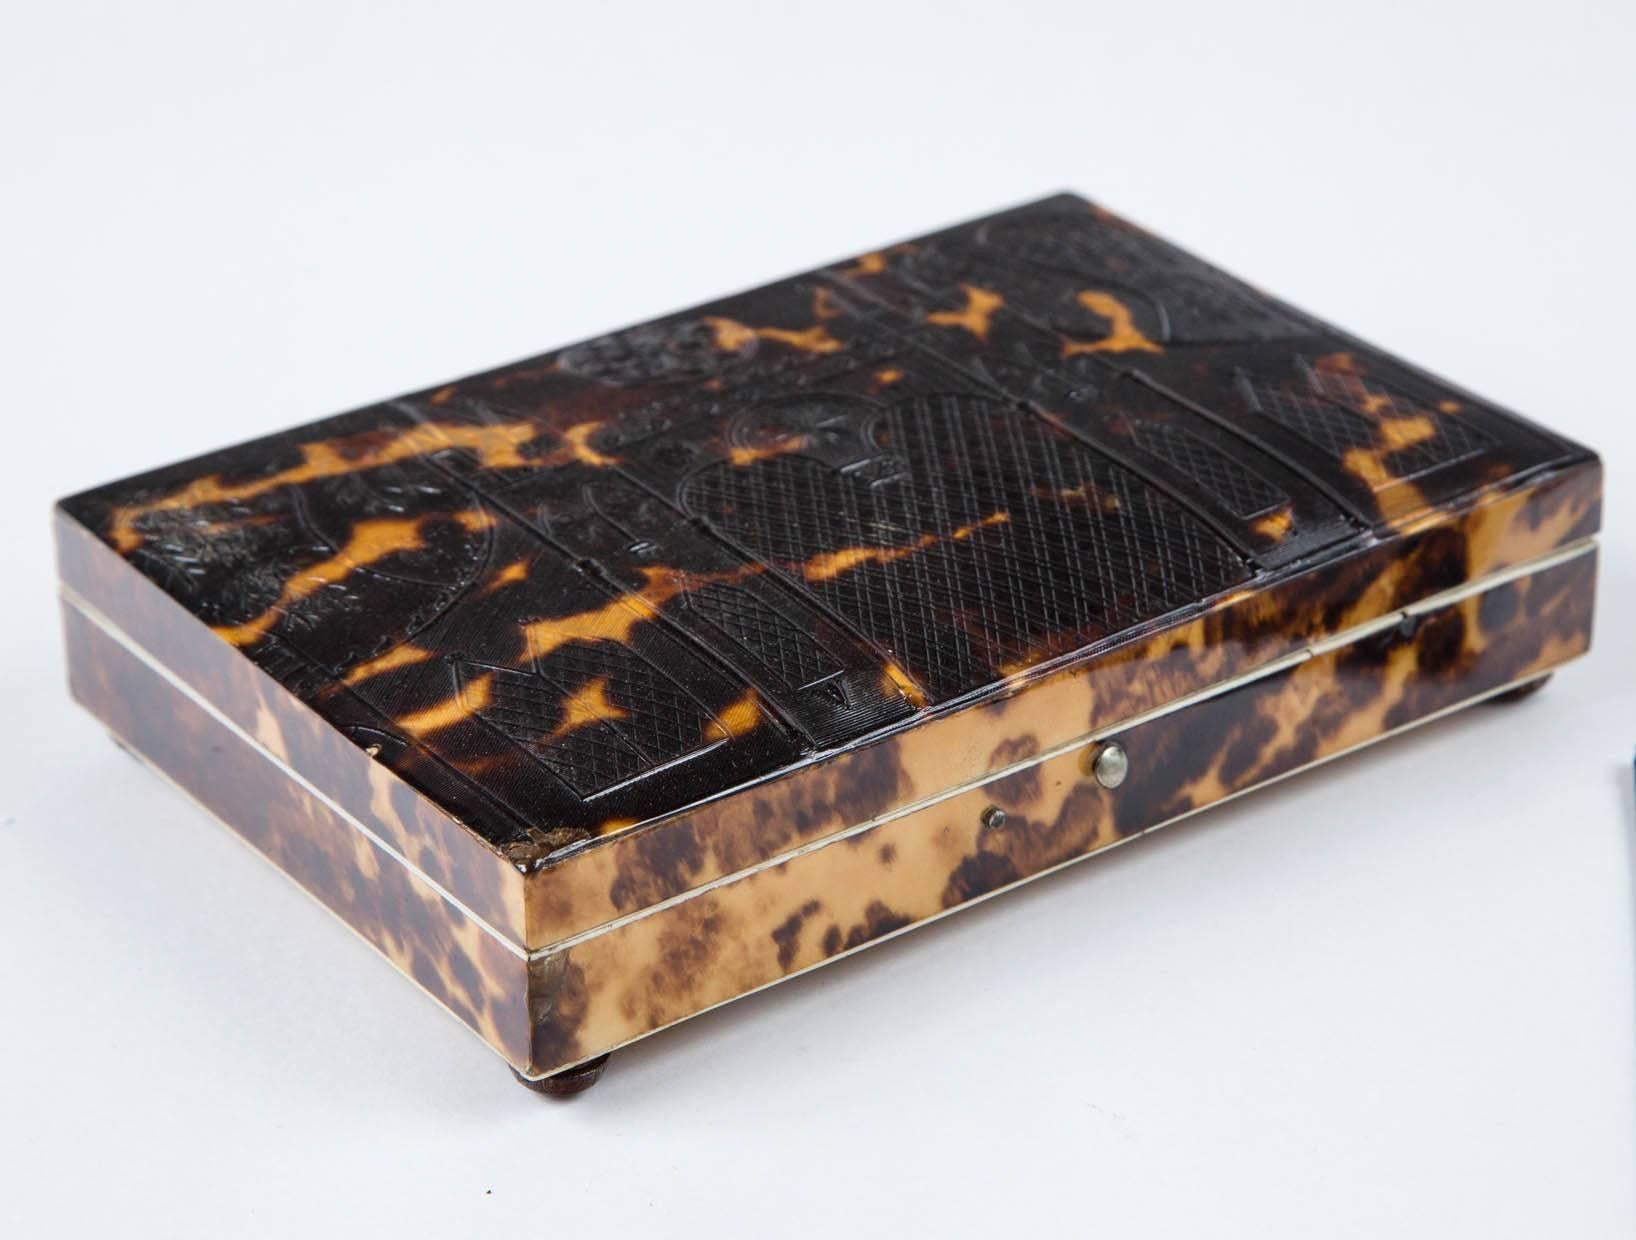 English 1820 tortoiseshell box with a Gothic Look. Excellent condition, and simply fab. Opens and closes perfectly, and has a Navy blue lining inside. The tortoise shell is embossed on the top which looks like a church with stain glass. It has four